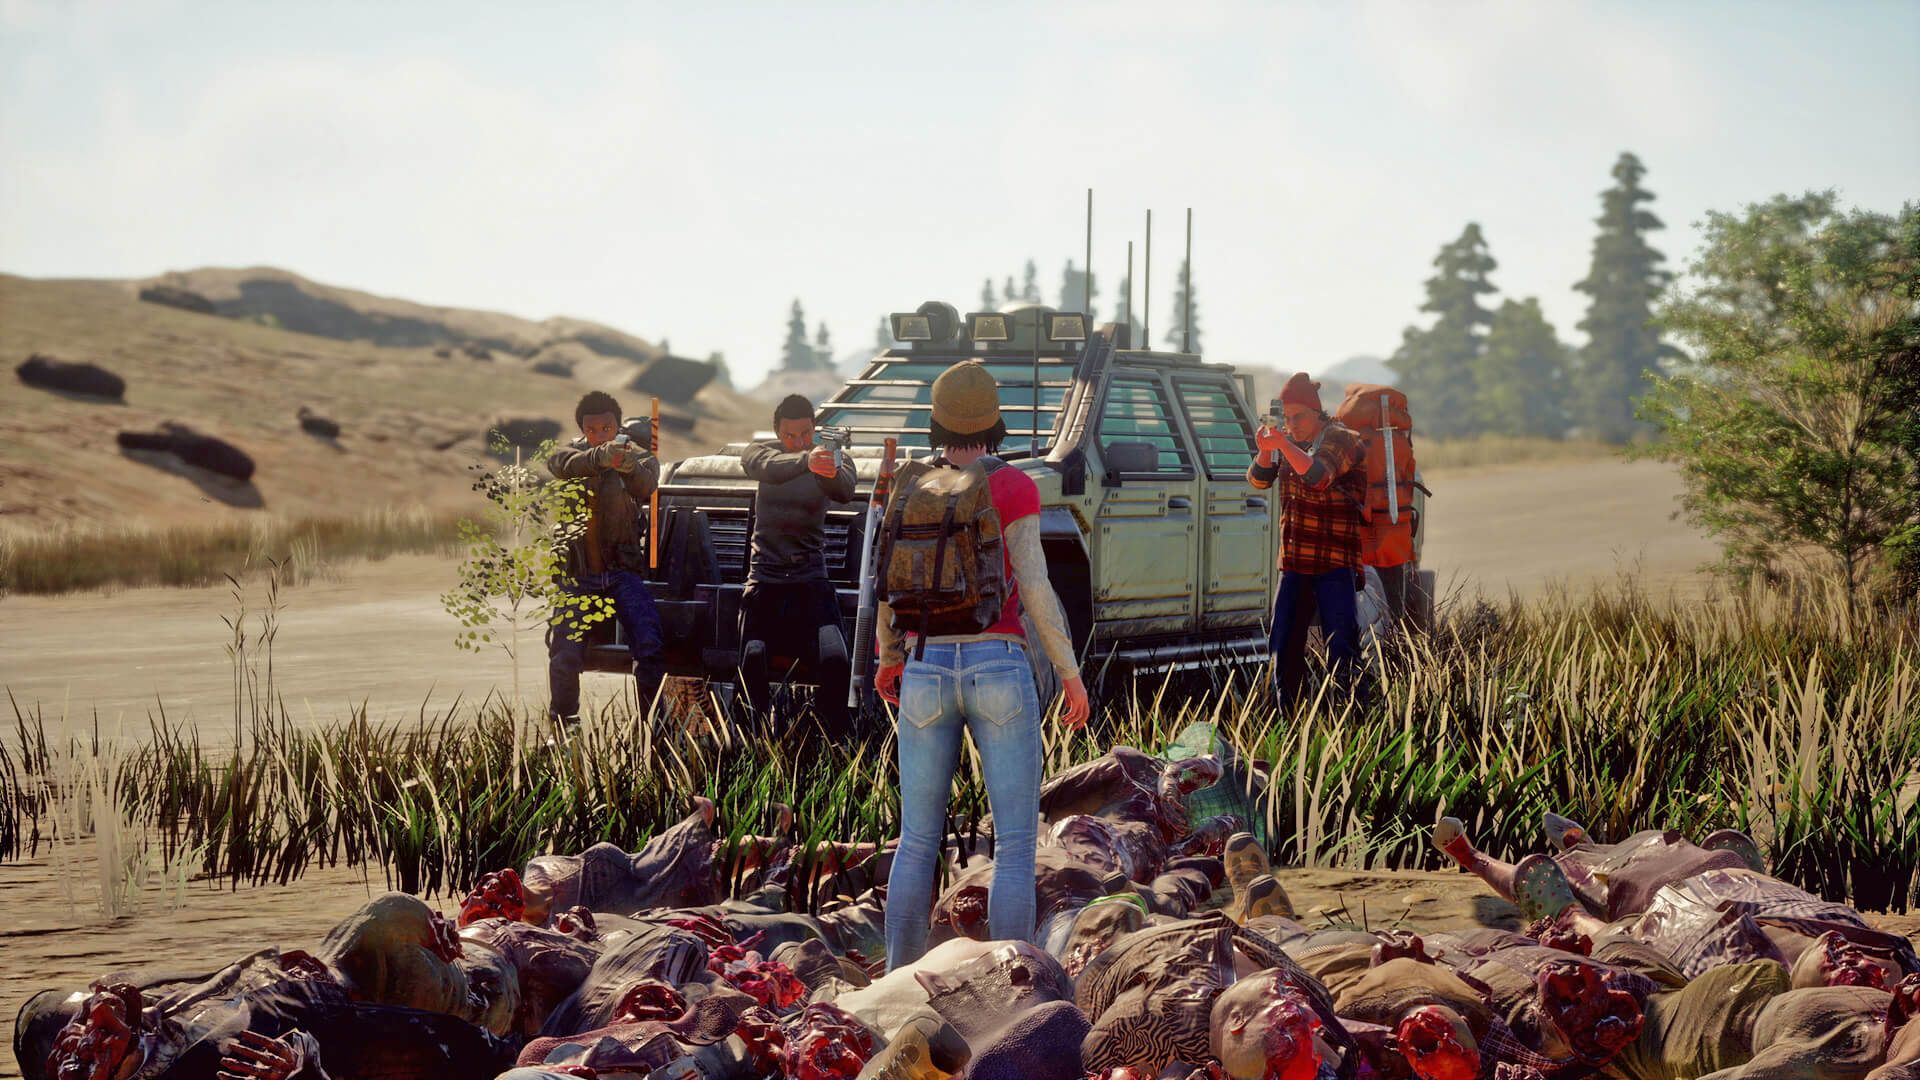 State of Decay +1 Trainer Download